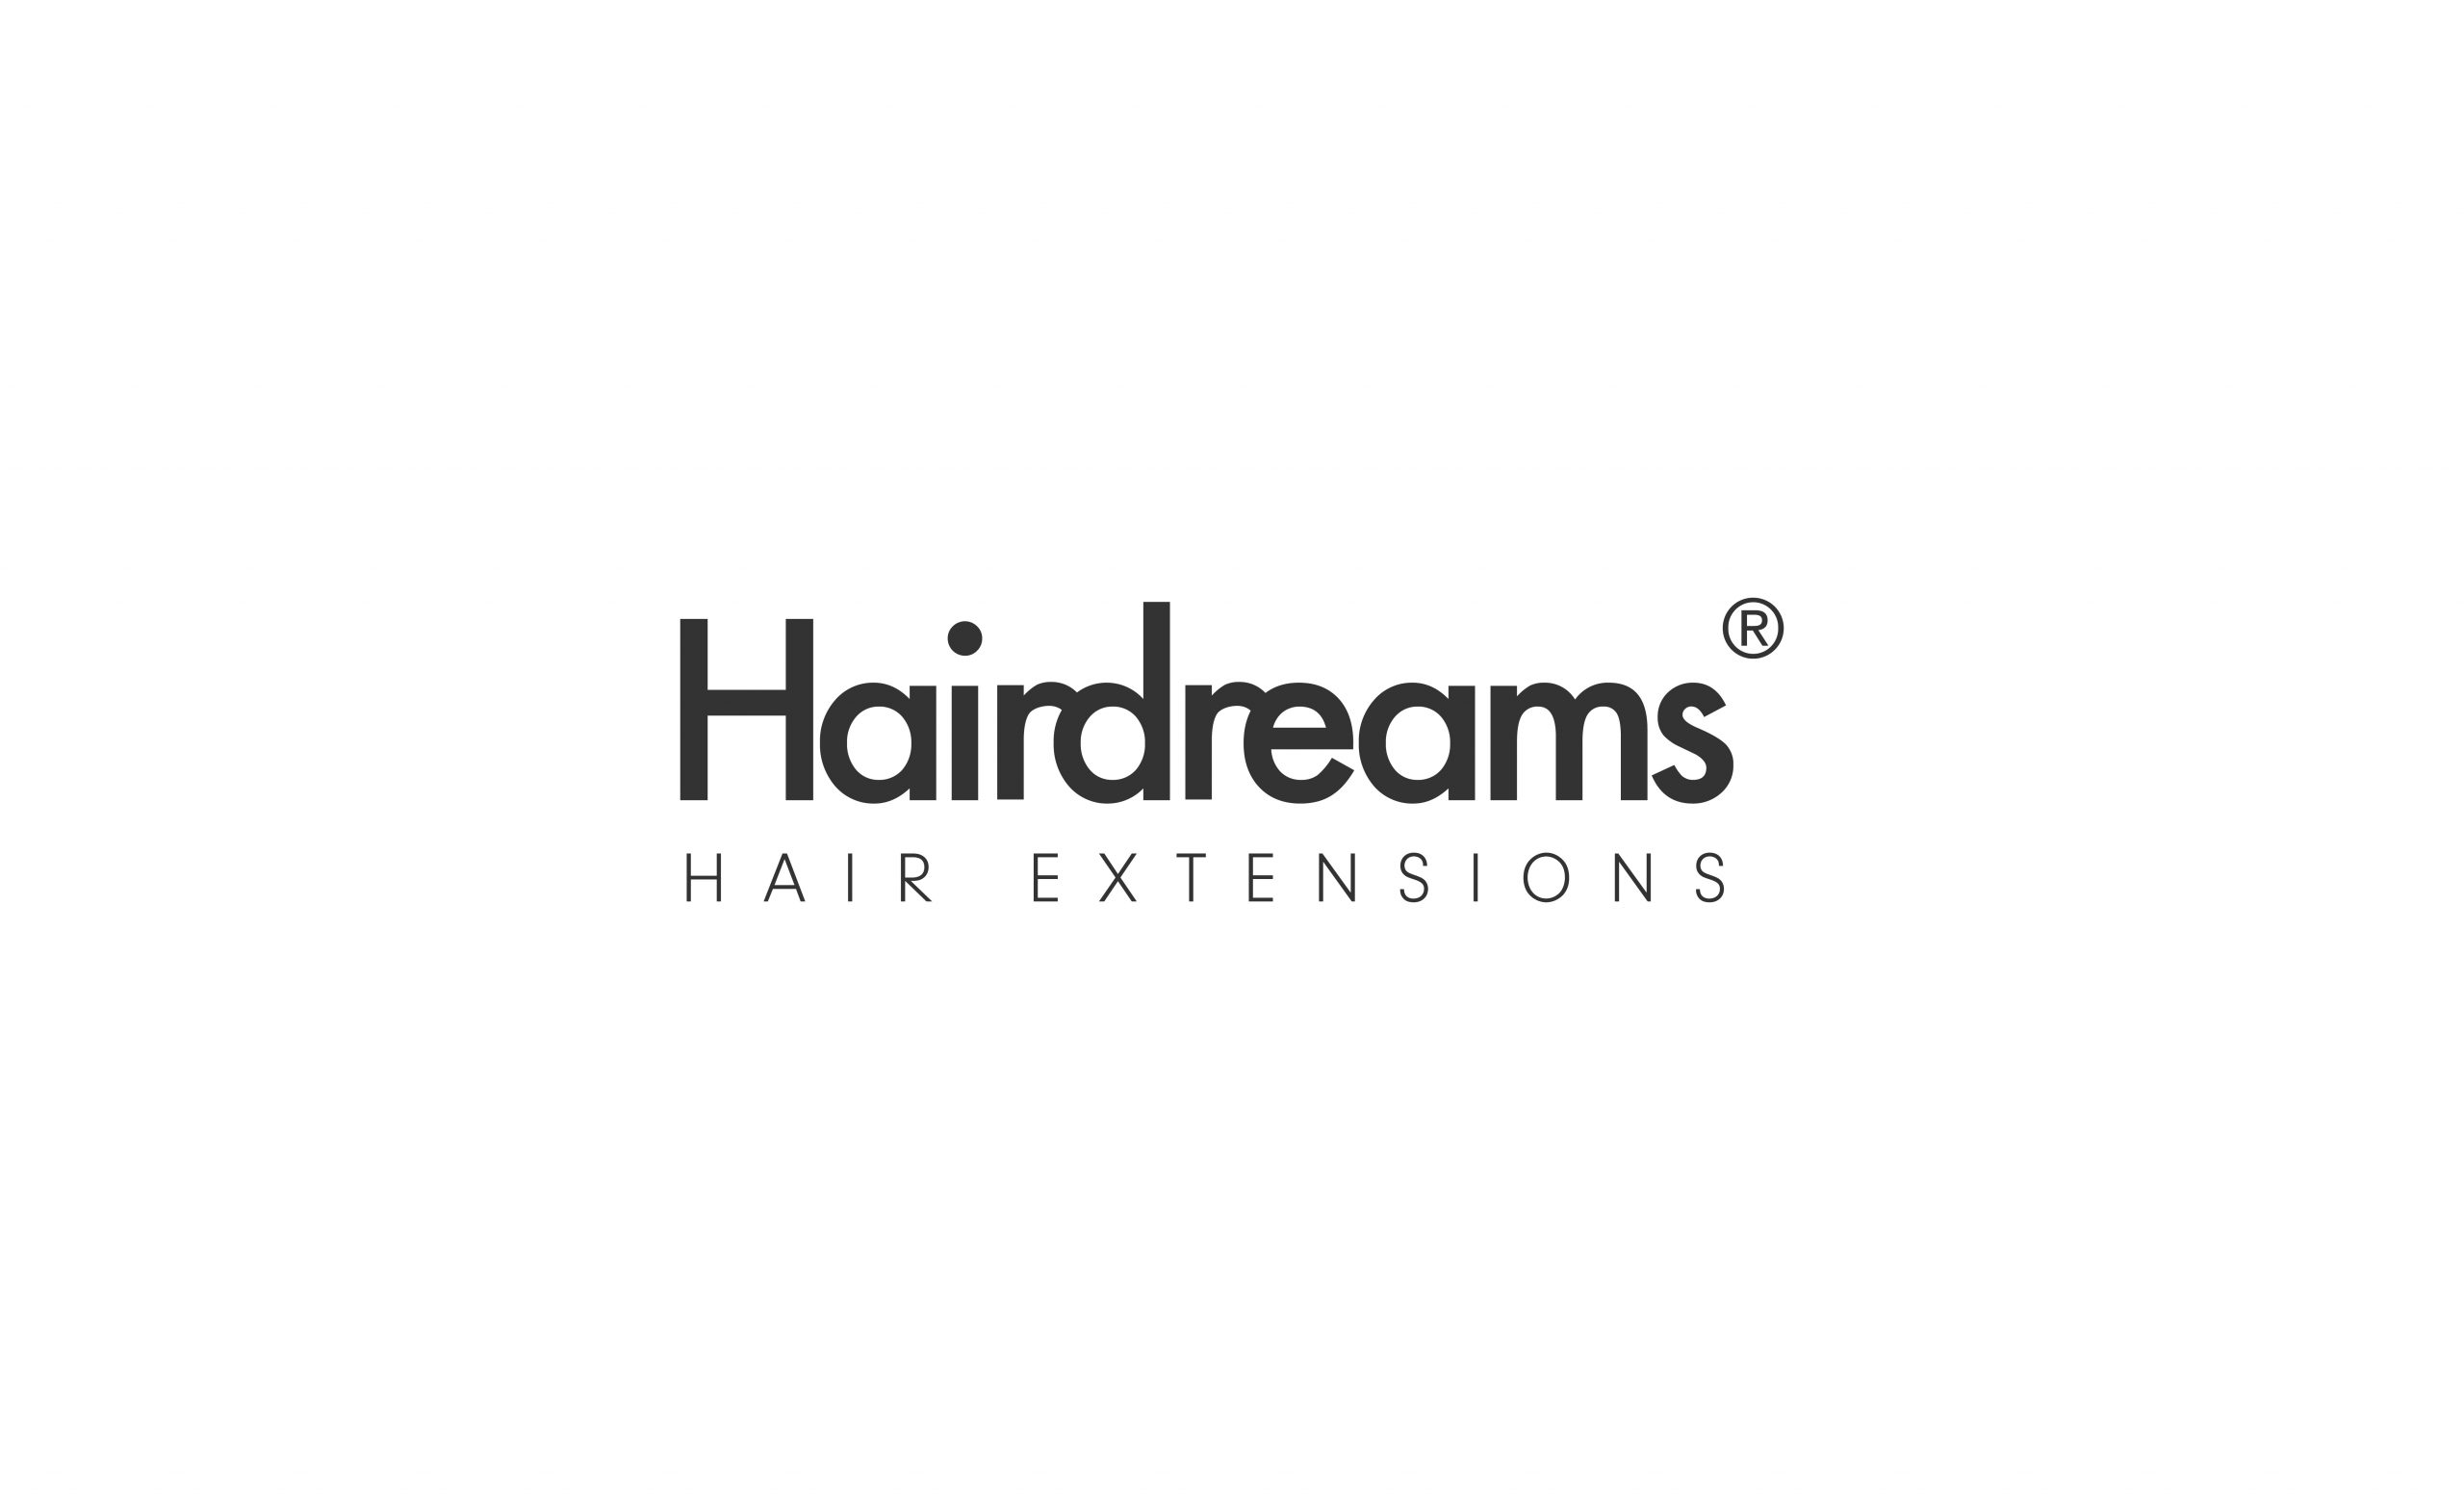 Hairdreams by Microlines